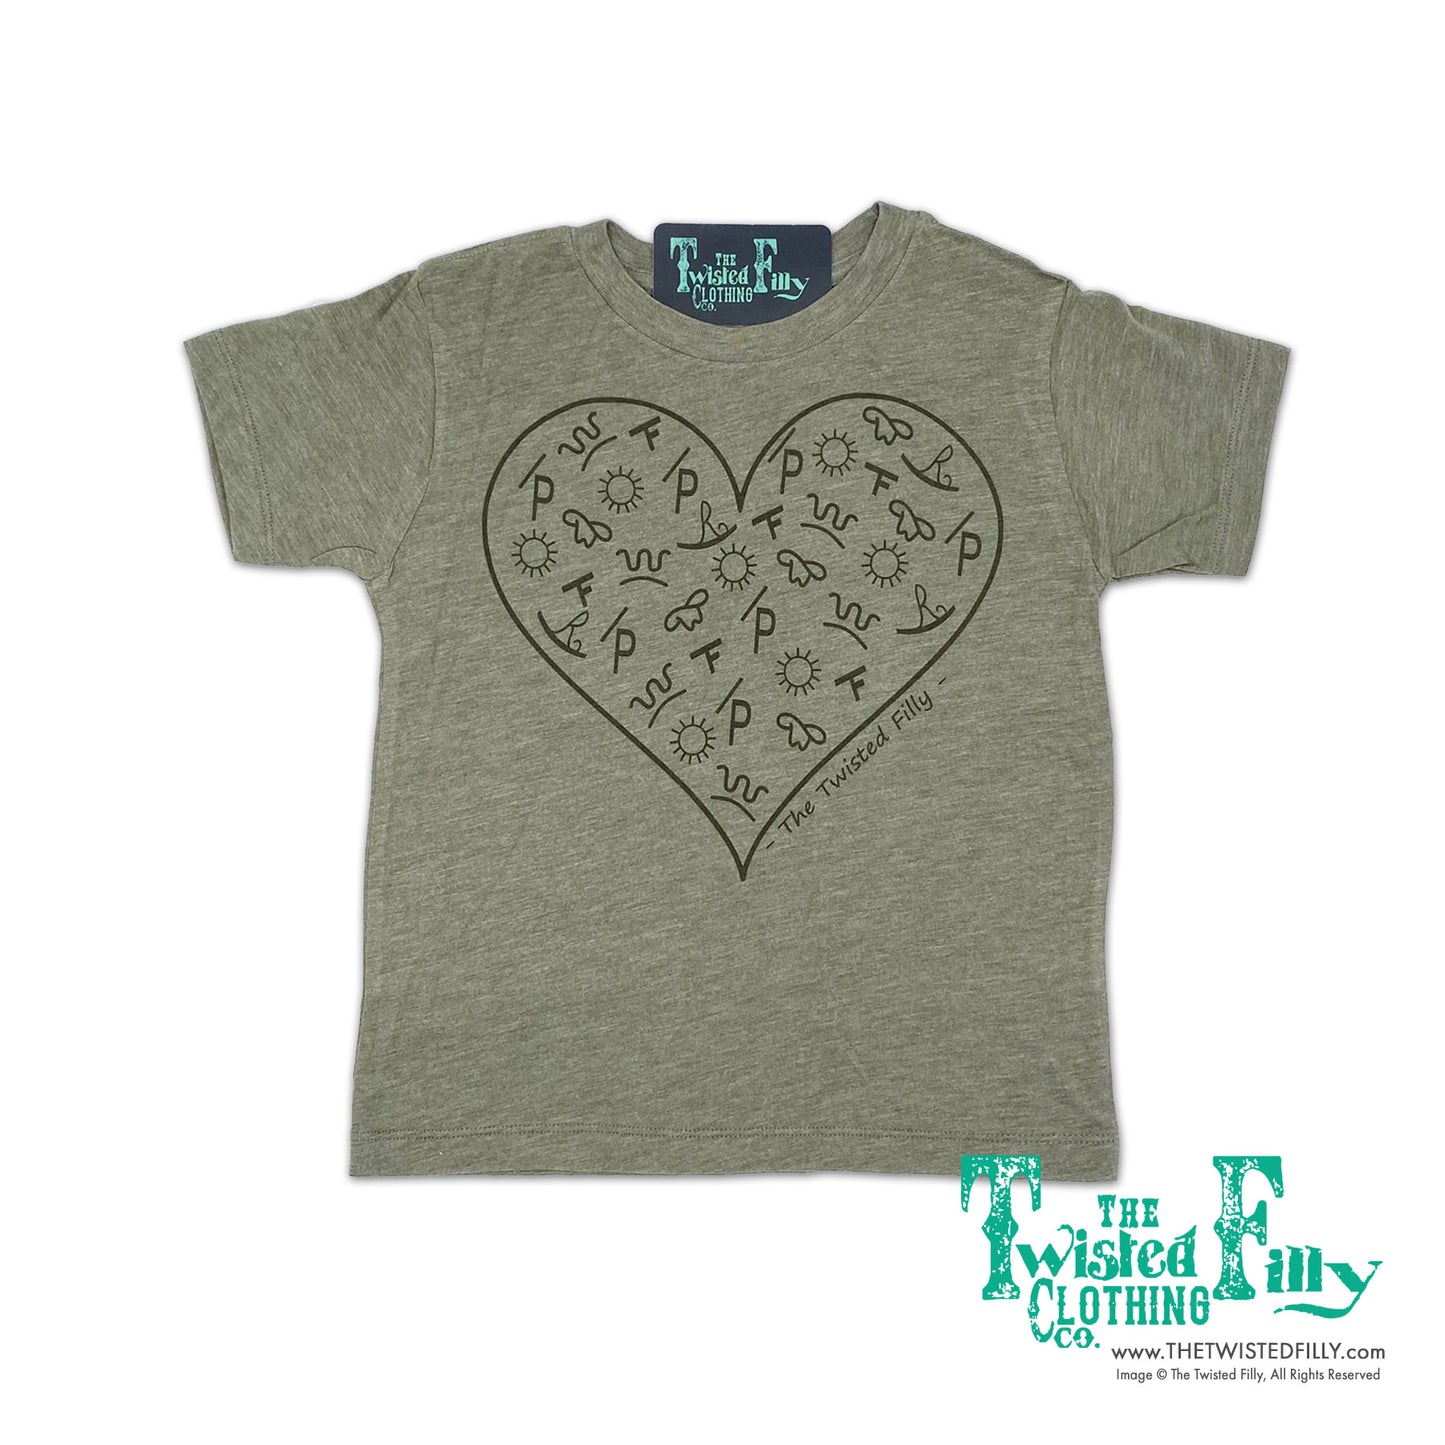 Branded Heart - S/S Youth Tee - Assorted Colors